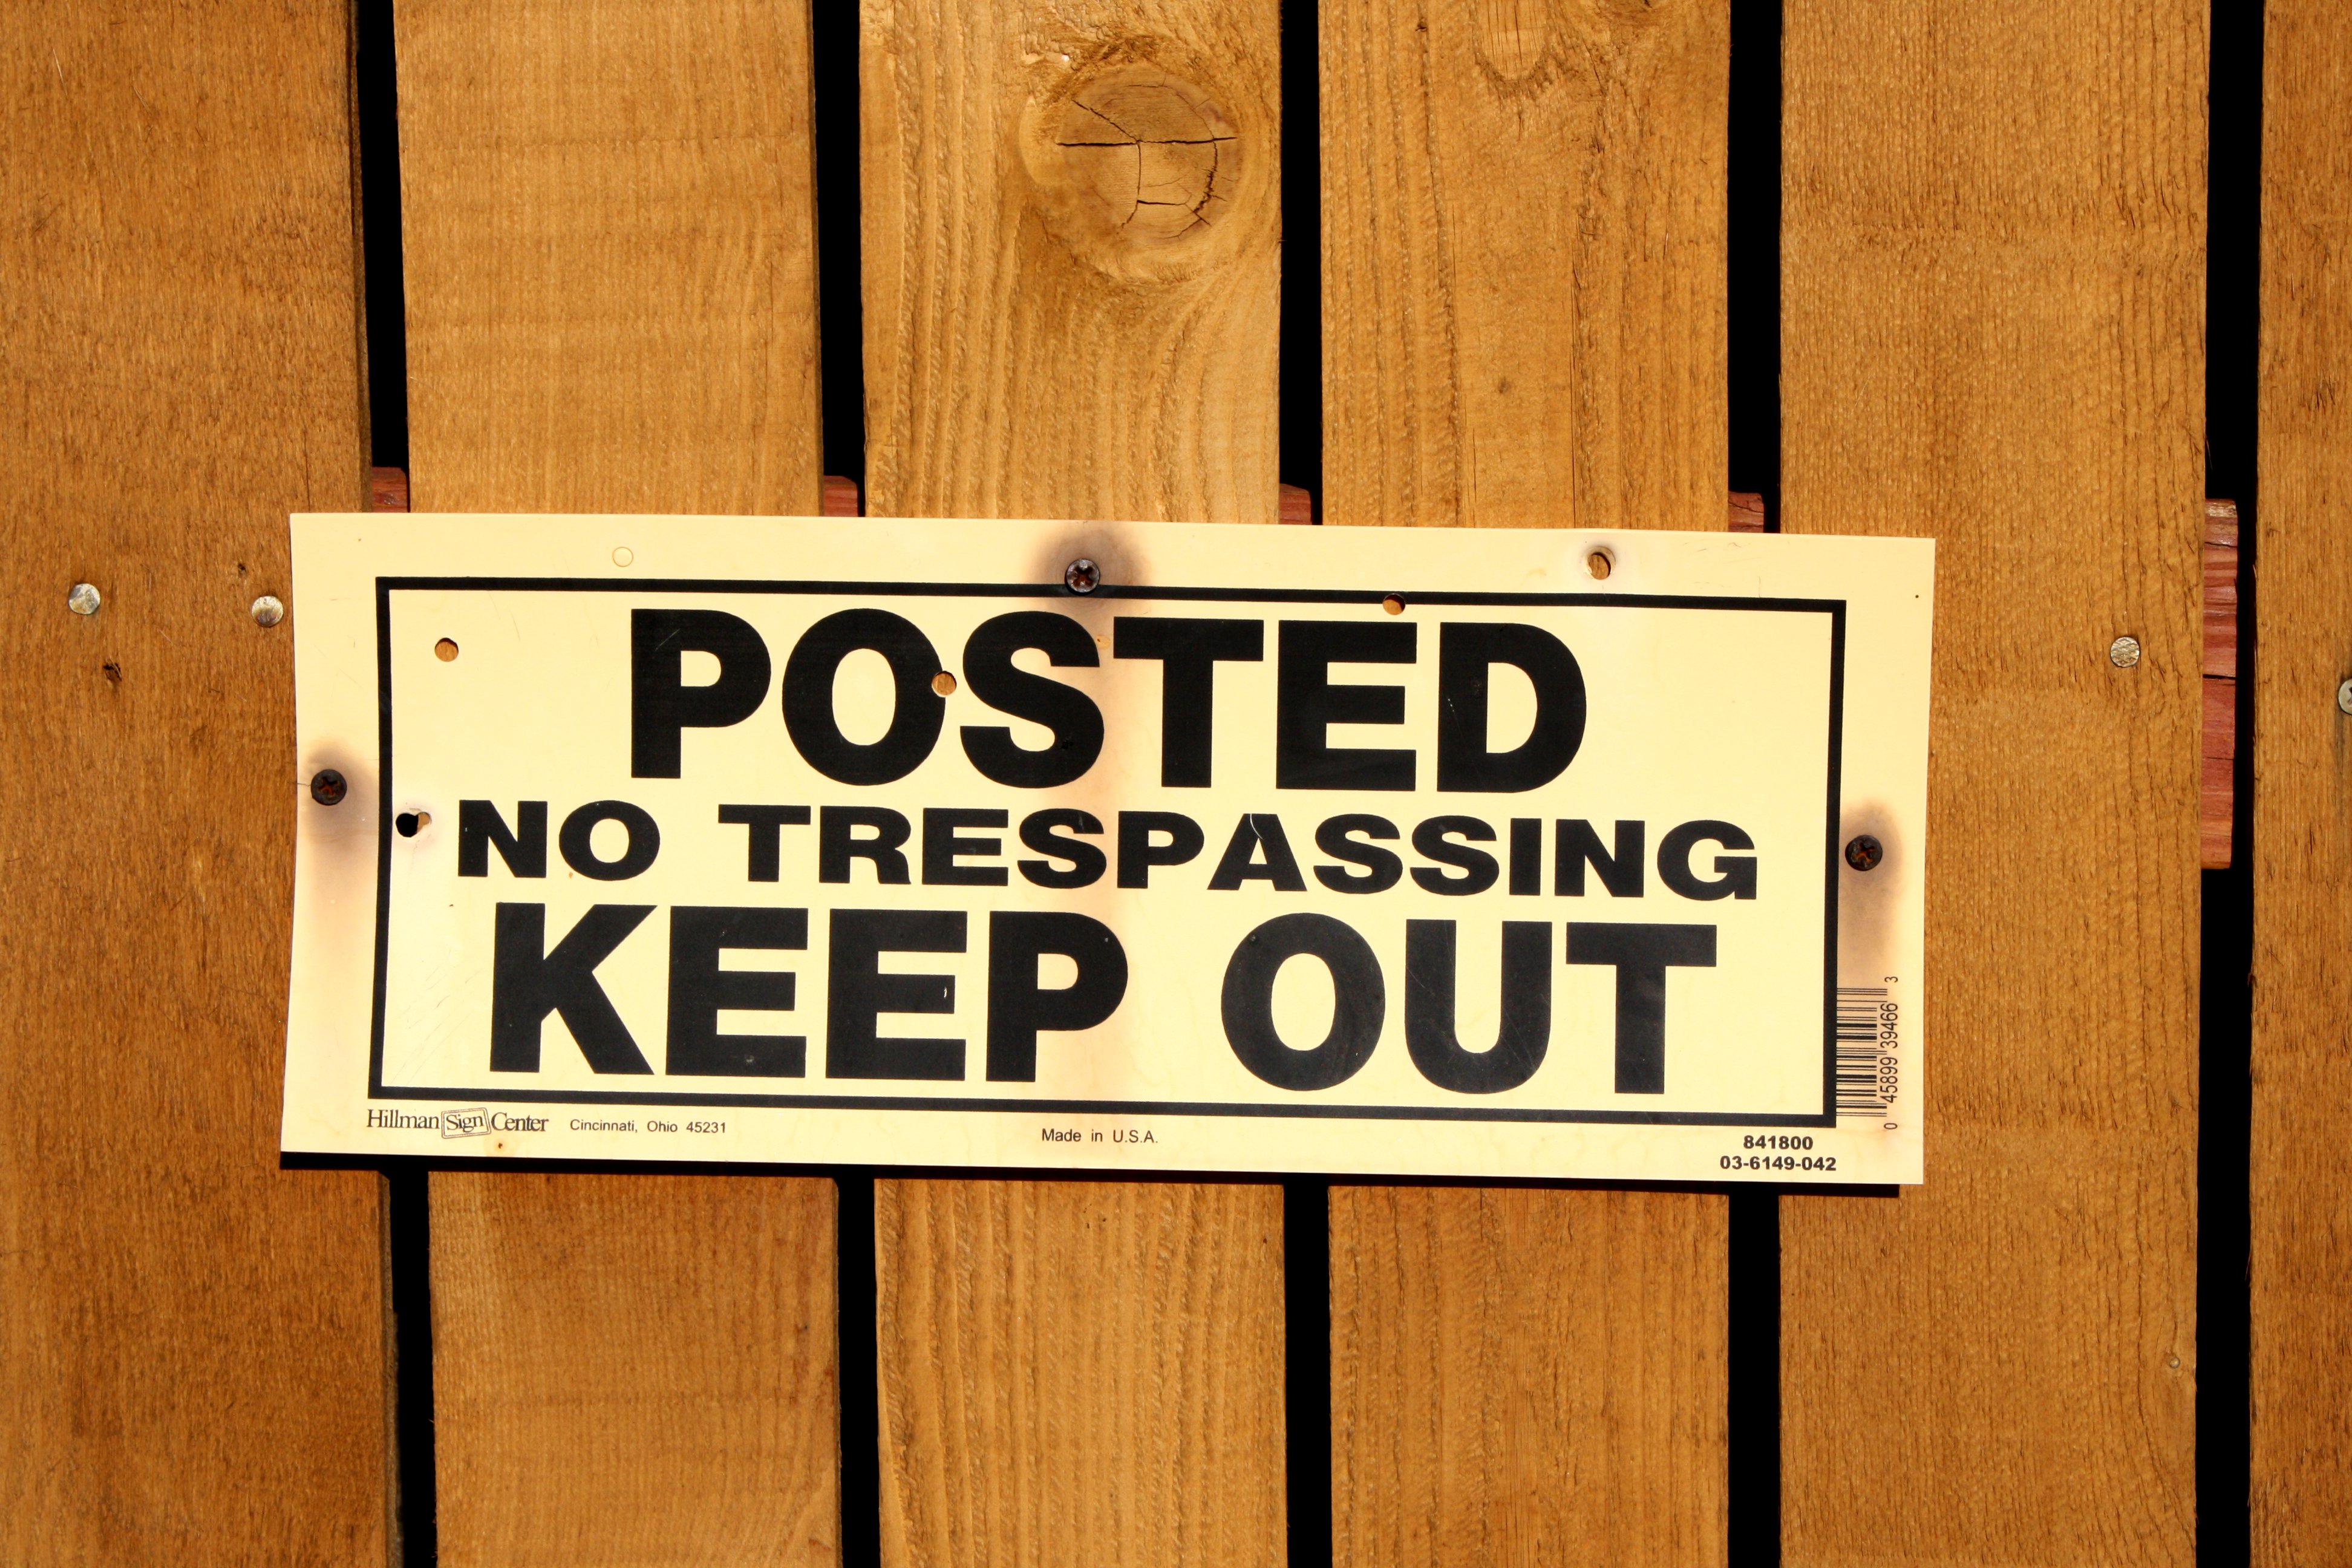 Posted Keep Out Sign Picture. Free Photograph. Photo Public Domain